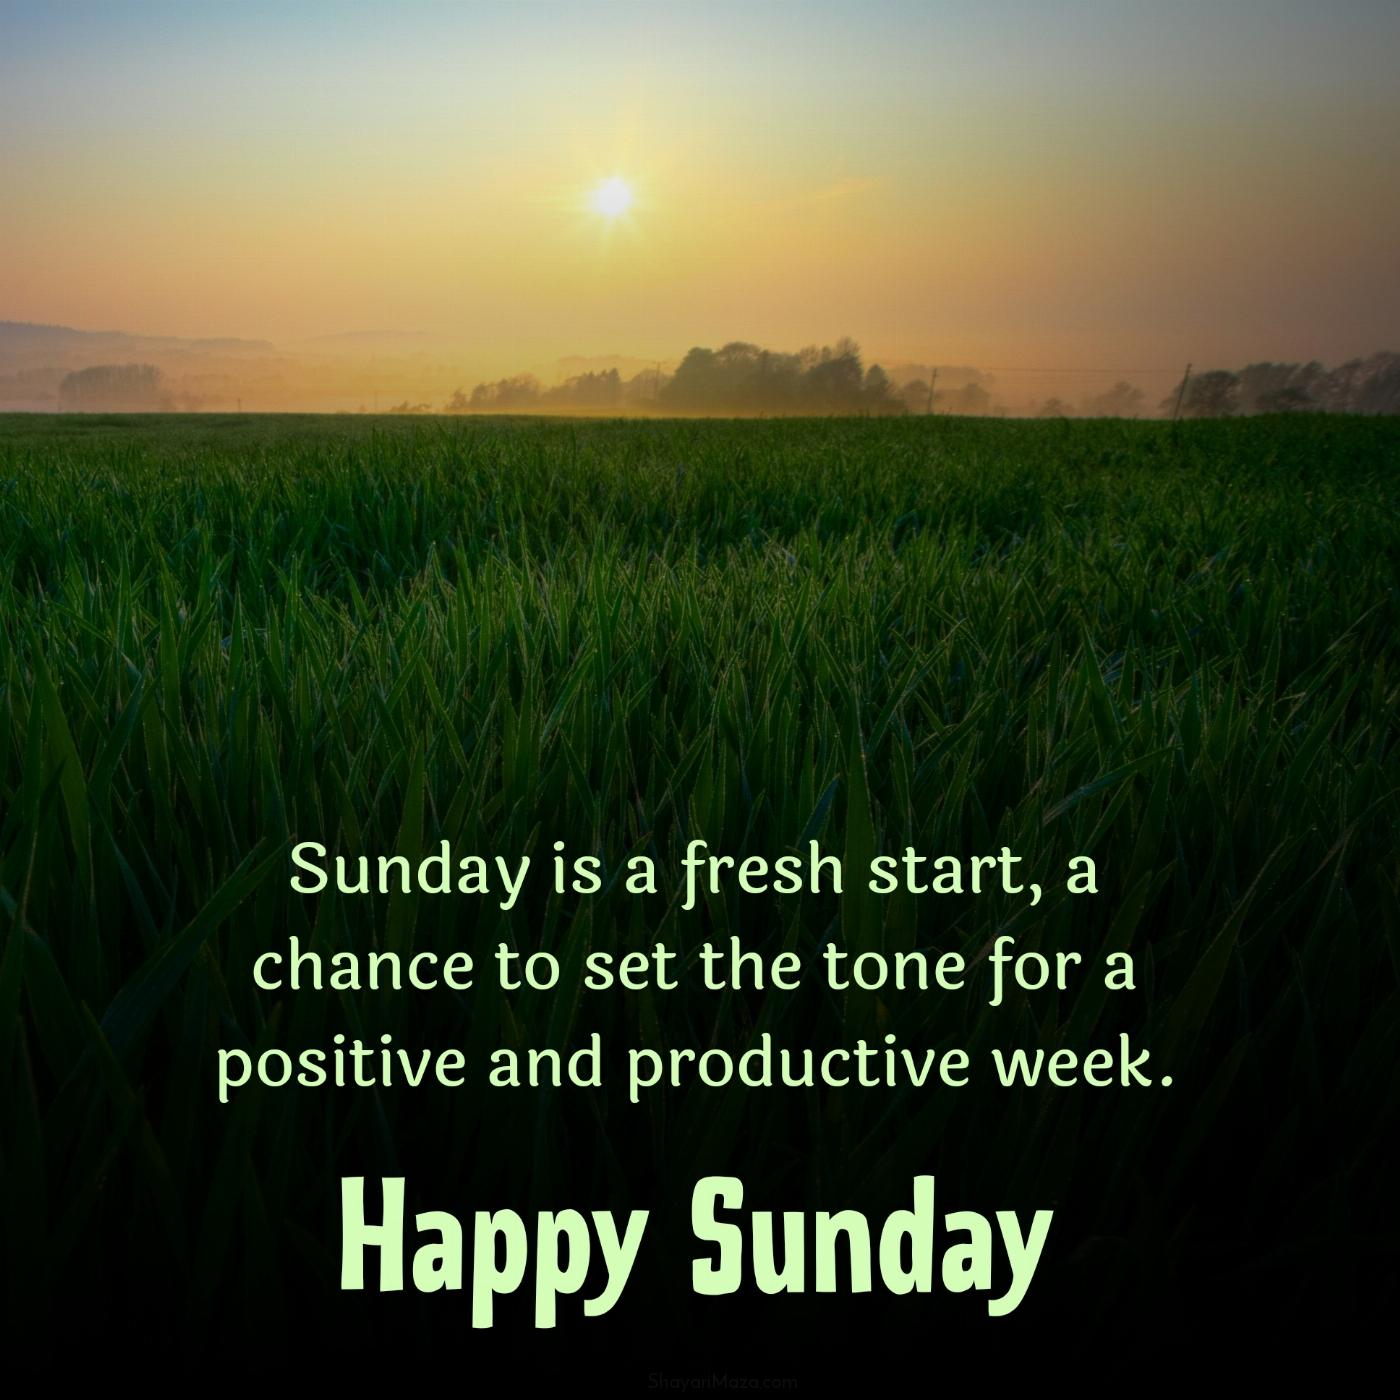 Sunday is a fresh start a chance to set the tone for a positive